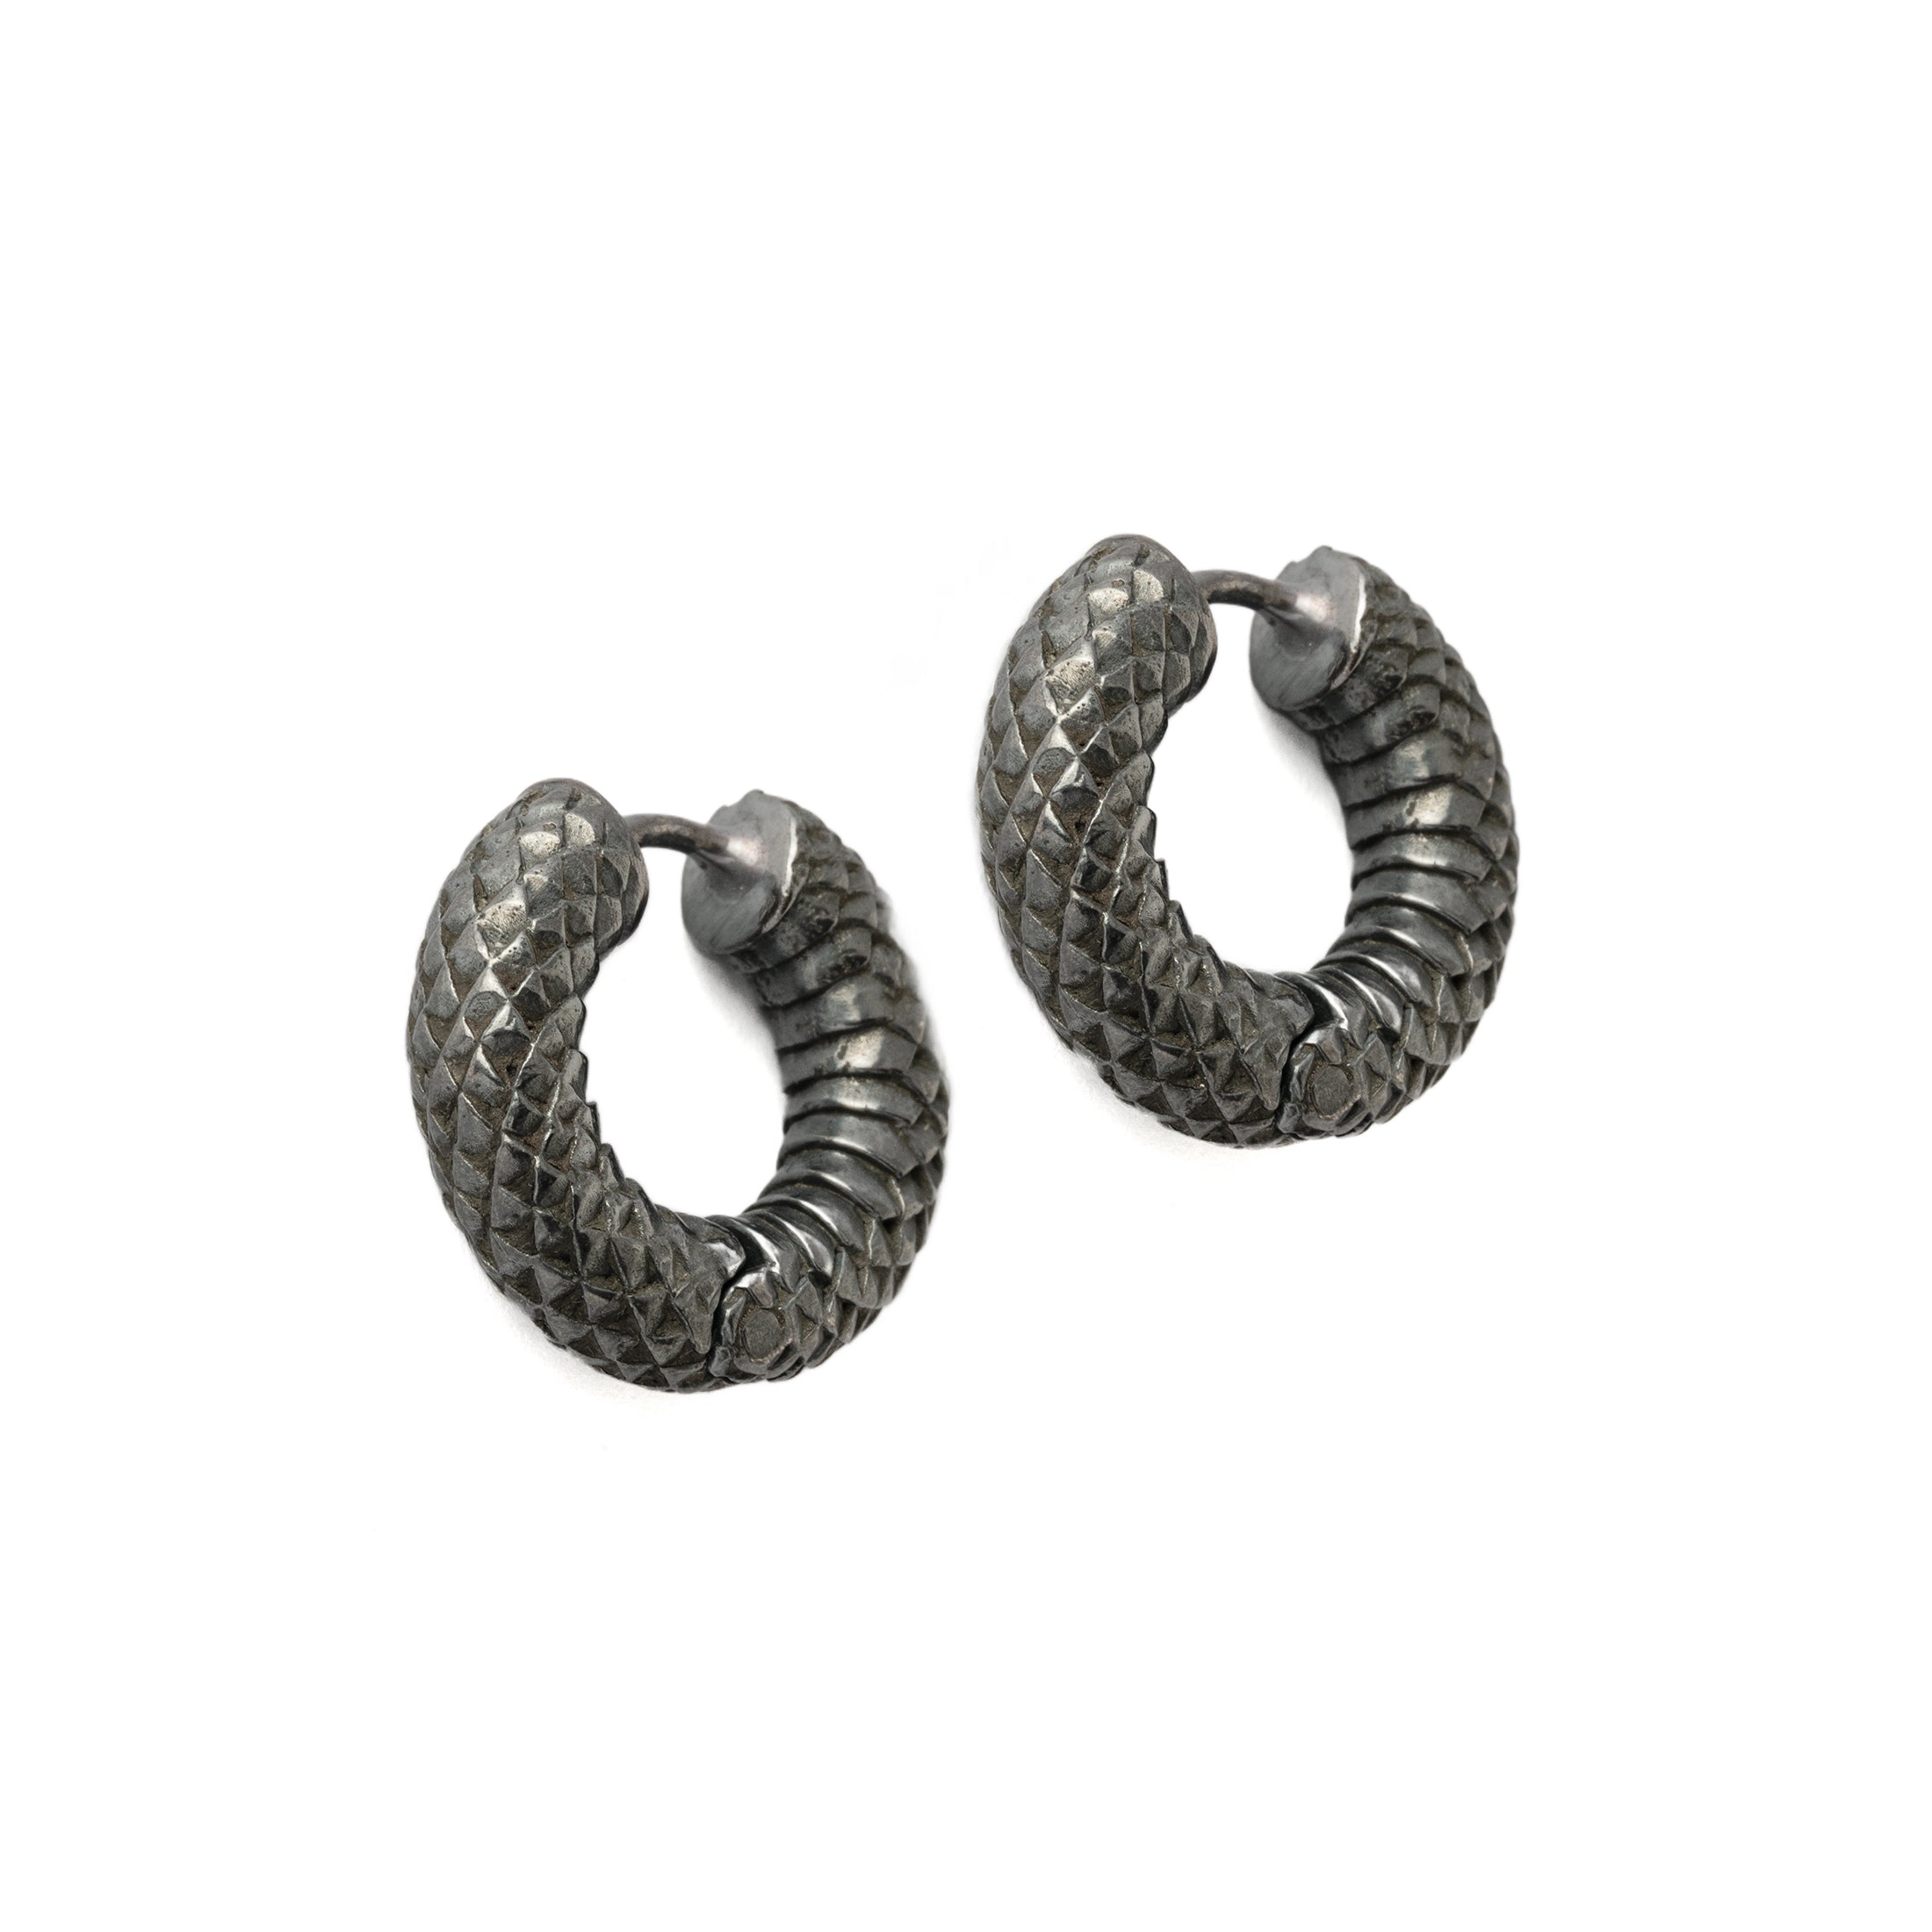 Pair of Rebirth Black Silver Clicker Earrings front view